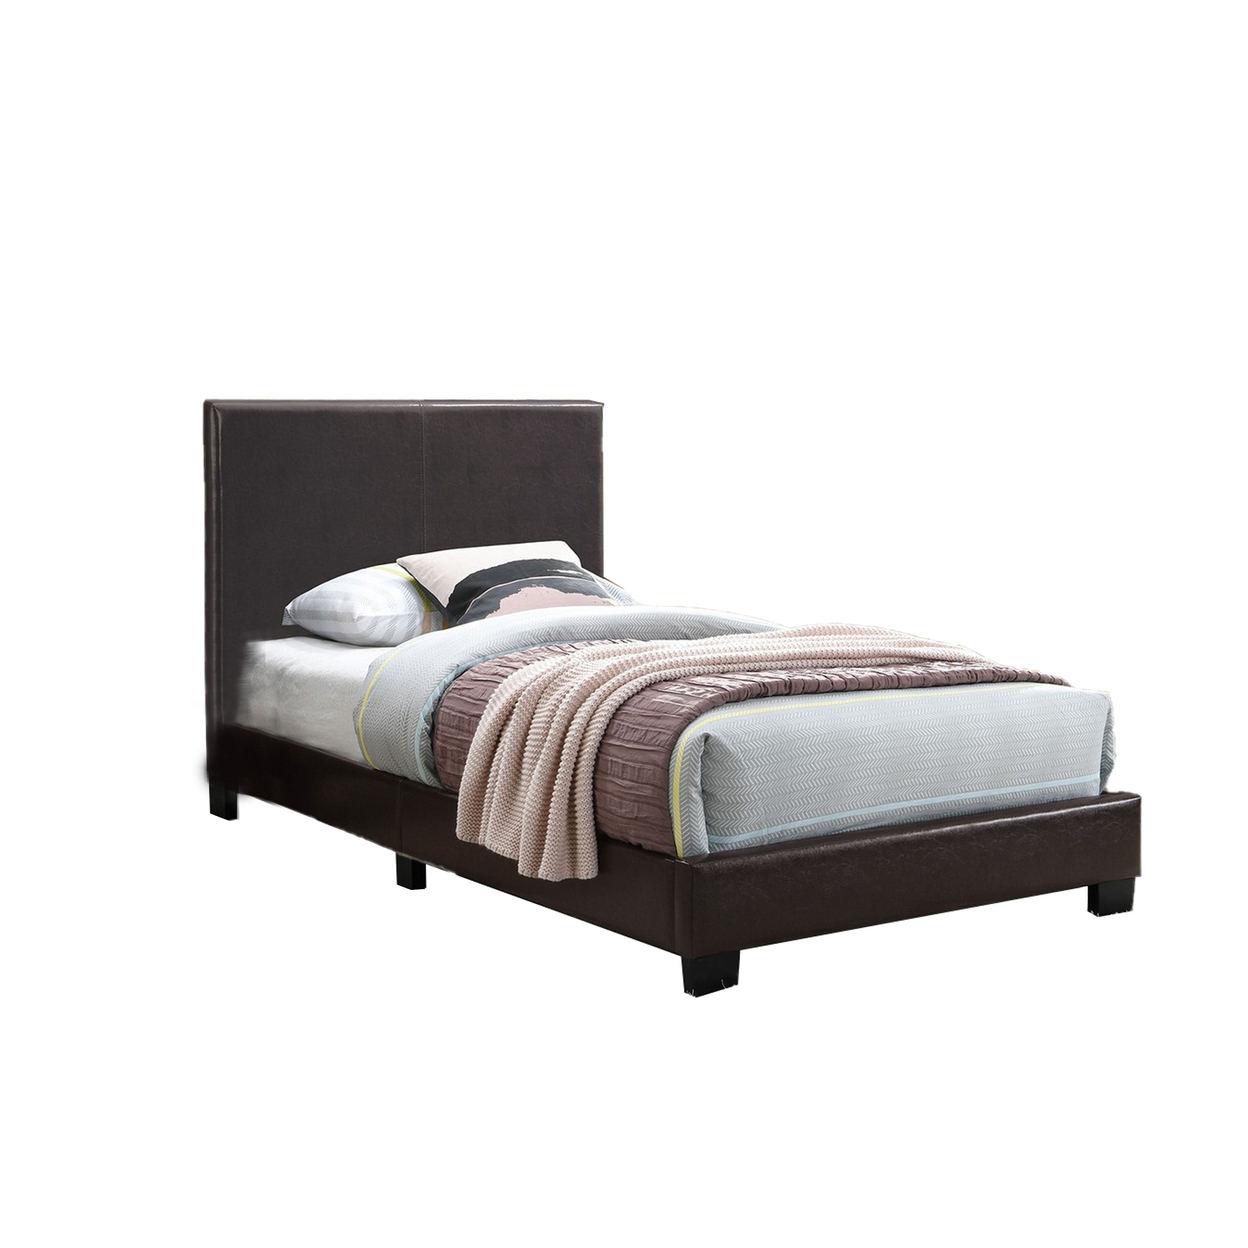 Transitional Style Leatherette Twin Bed With Padded Headboard, Dark Brown- Saltoro Sherpi